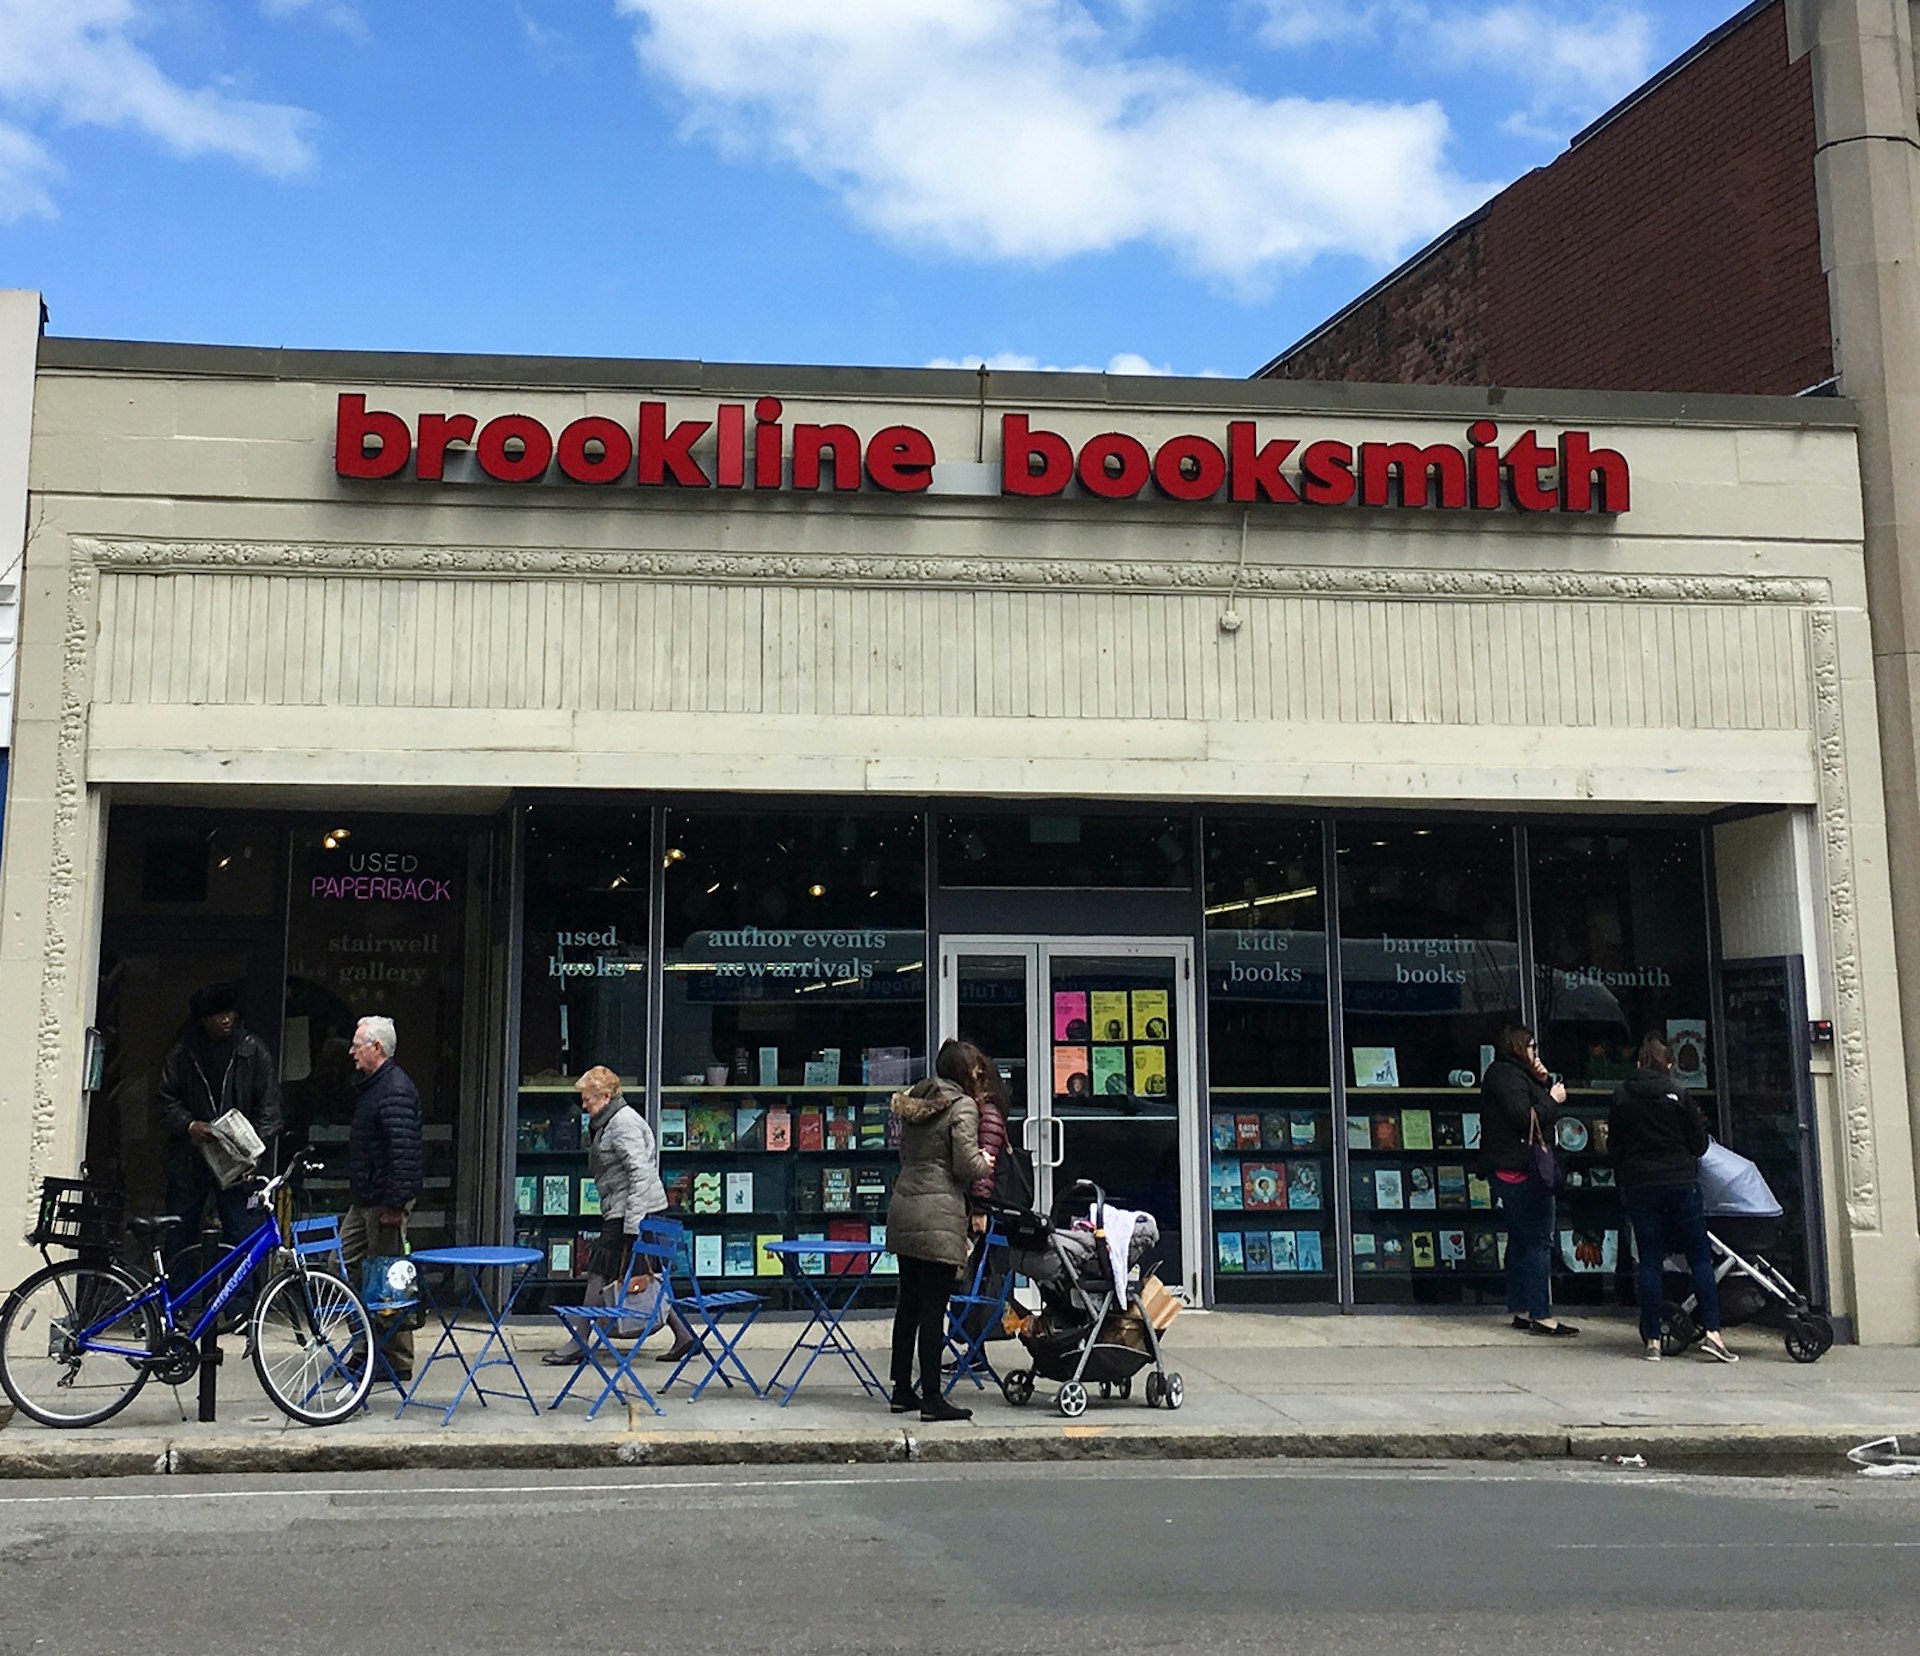 facade of bookstore in strip mall with pedestrians walking past